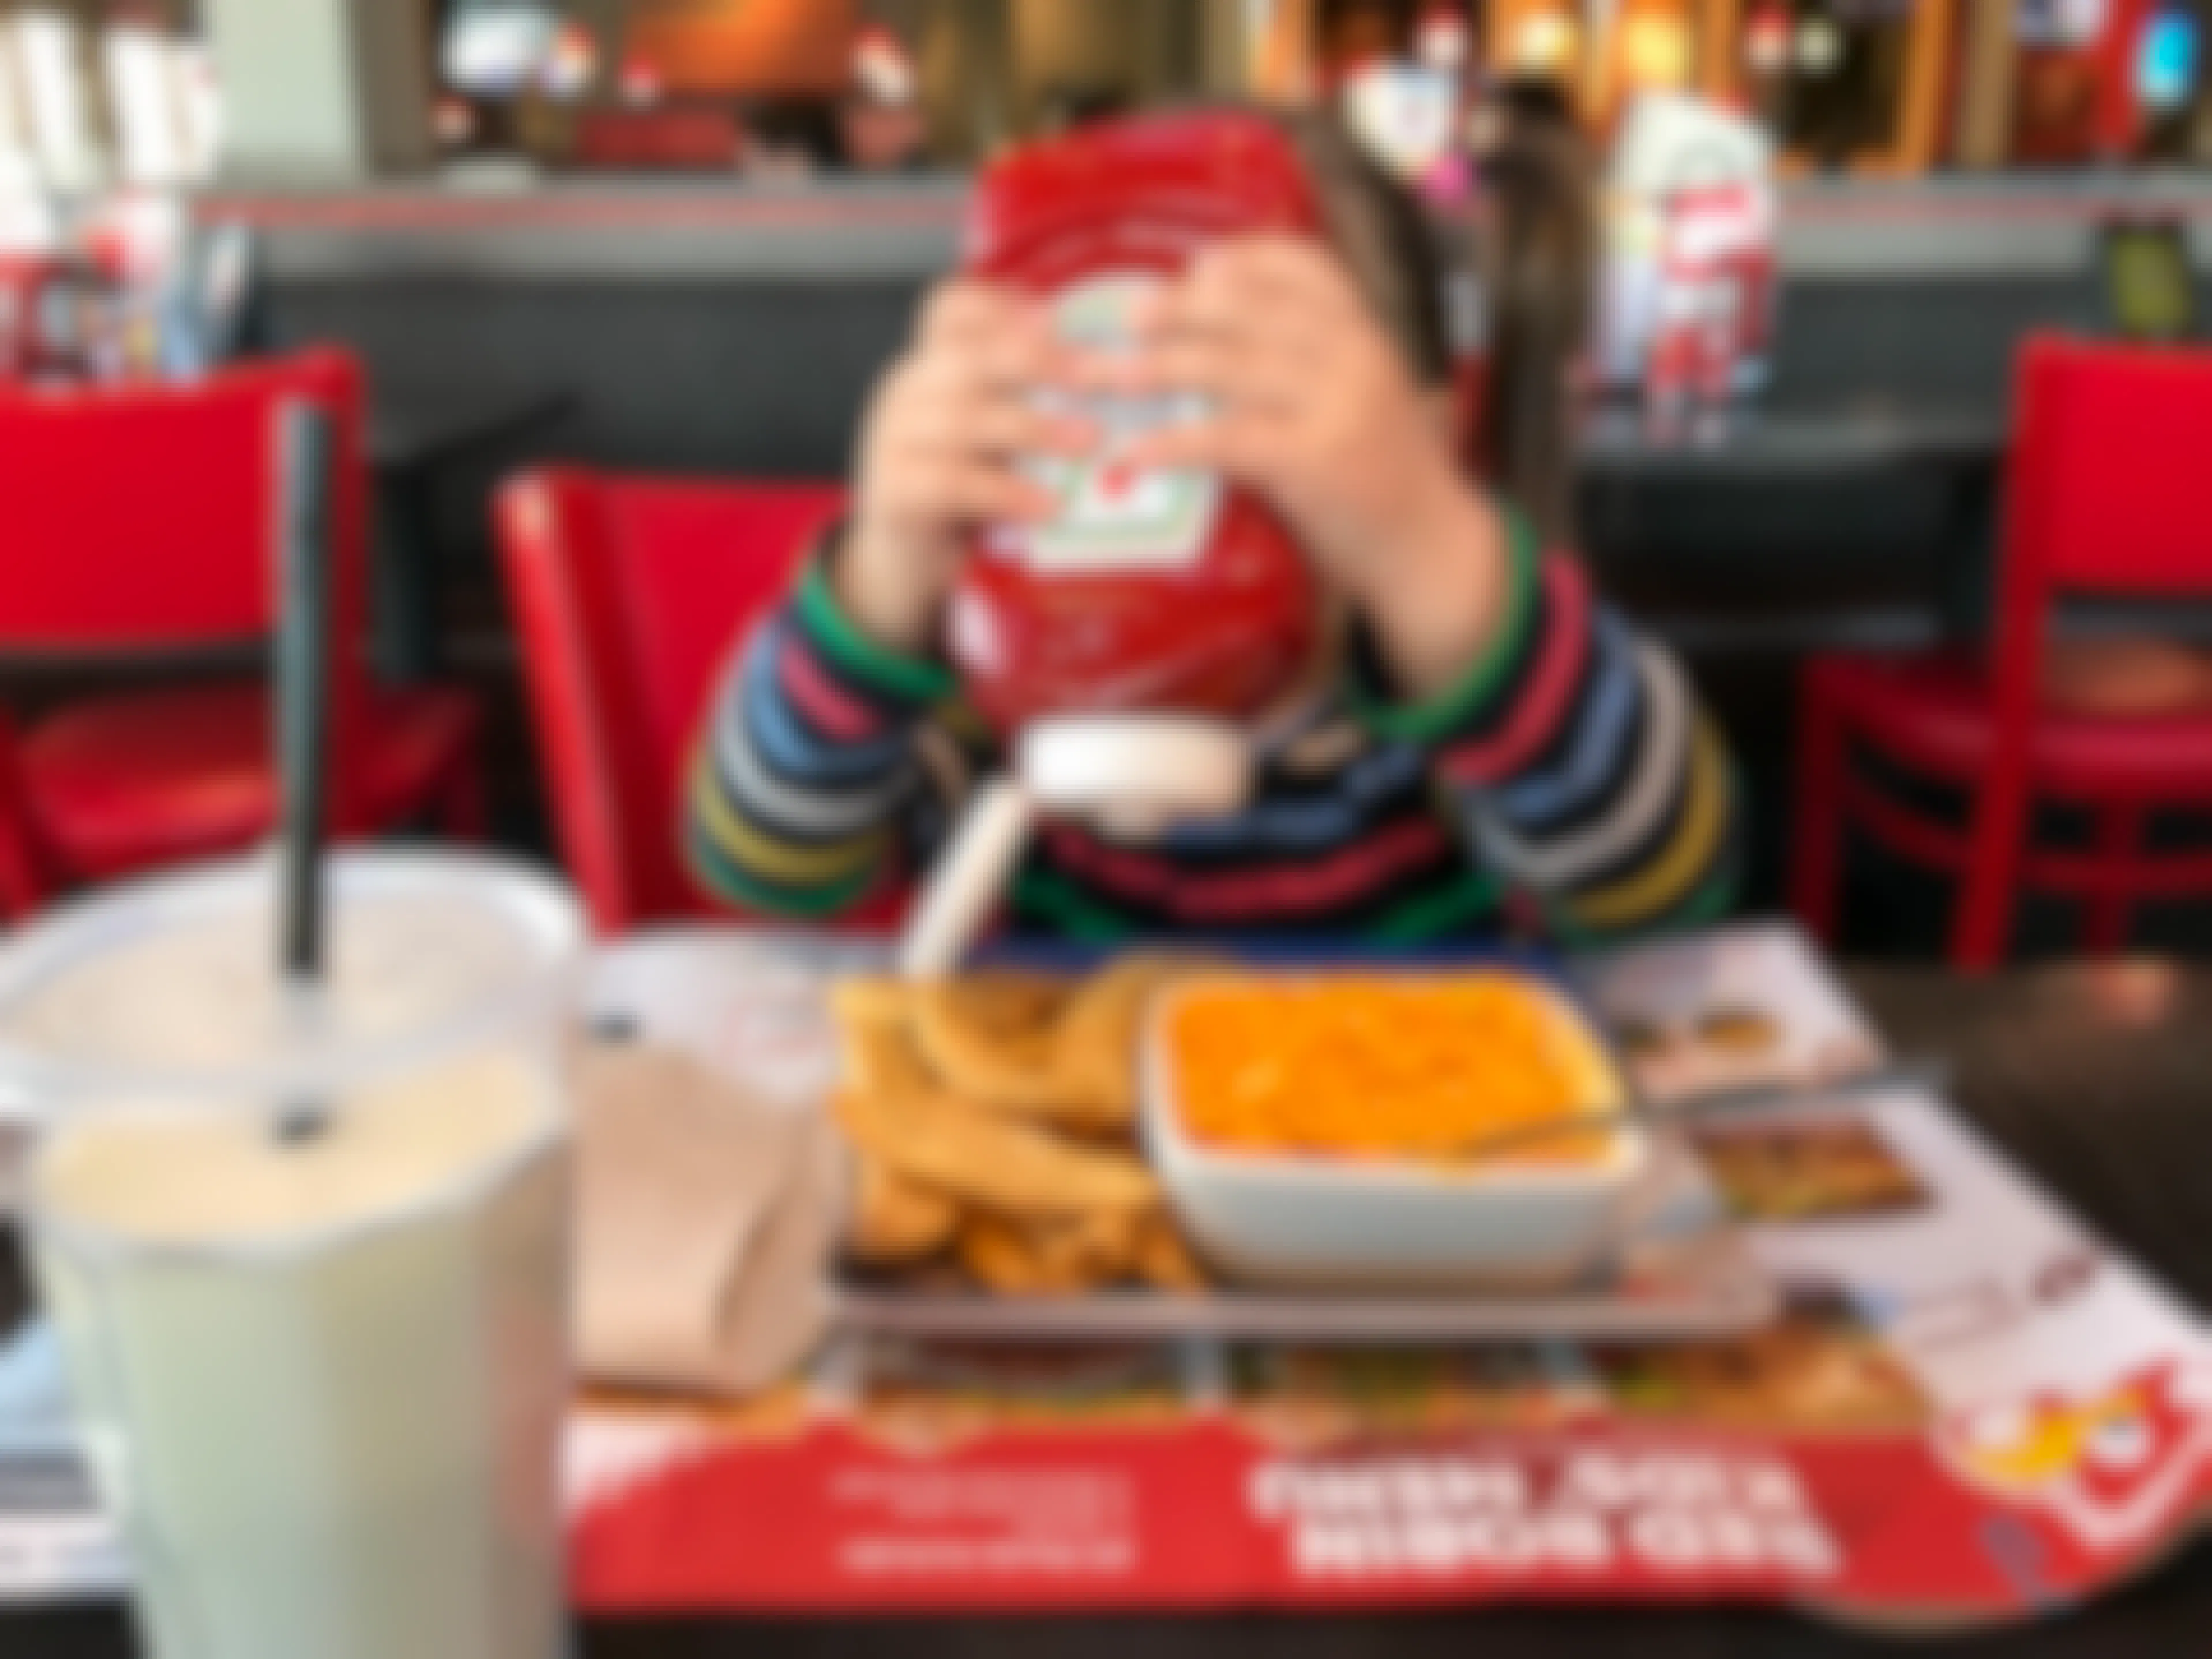 A child squeezing a bottle of Heinz ketchup onto a plate of fries and mac and cheese in front of her at a booth at Red Robin.